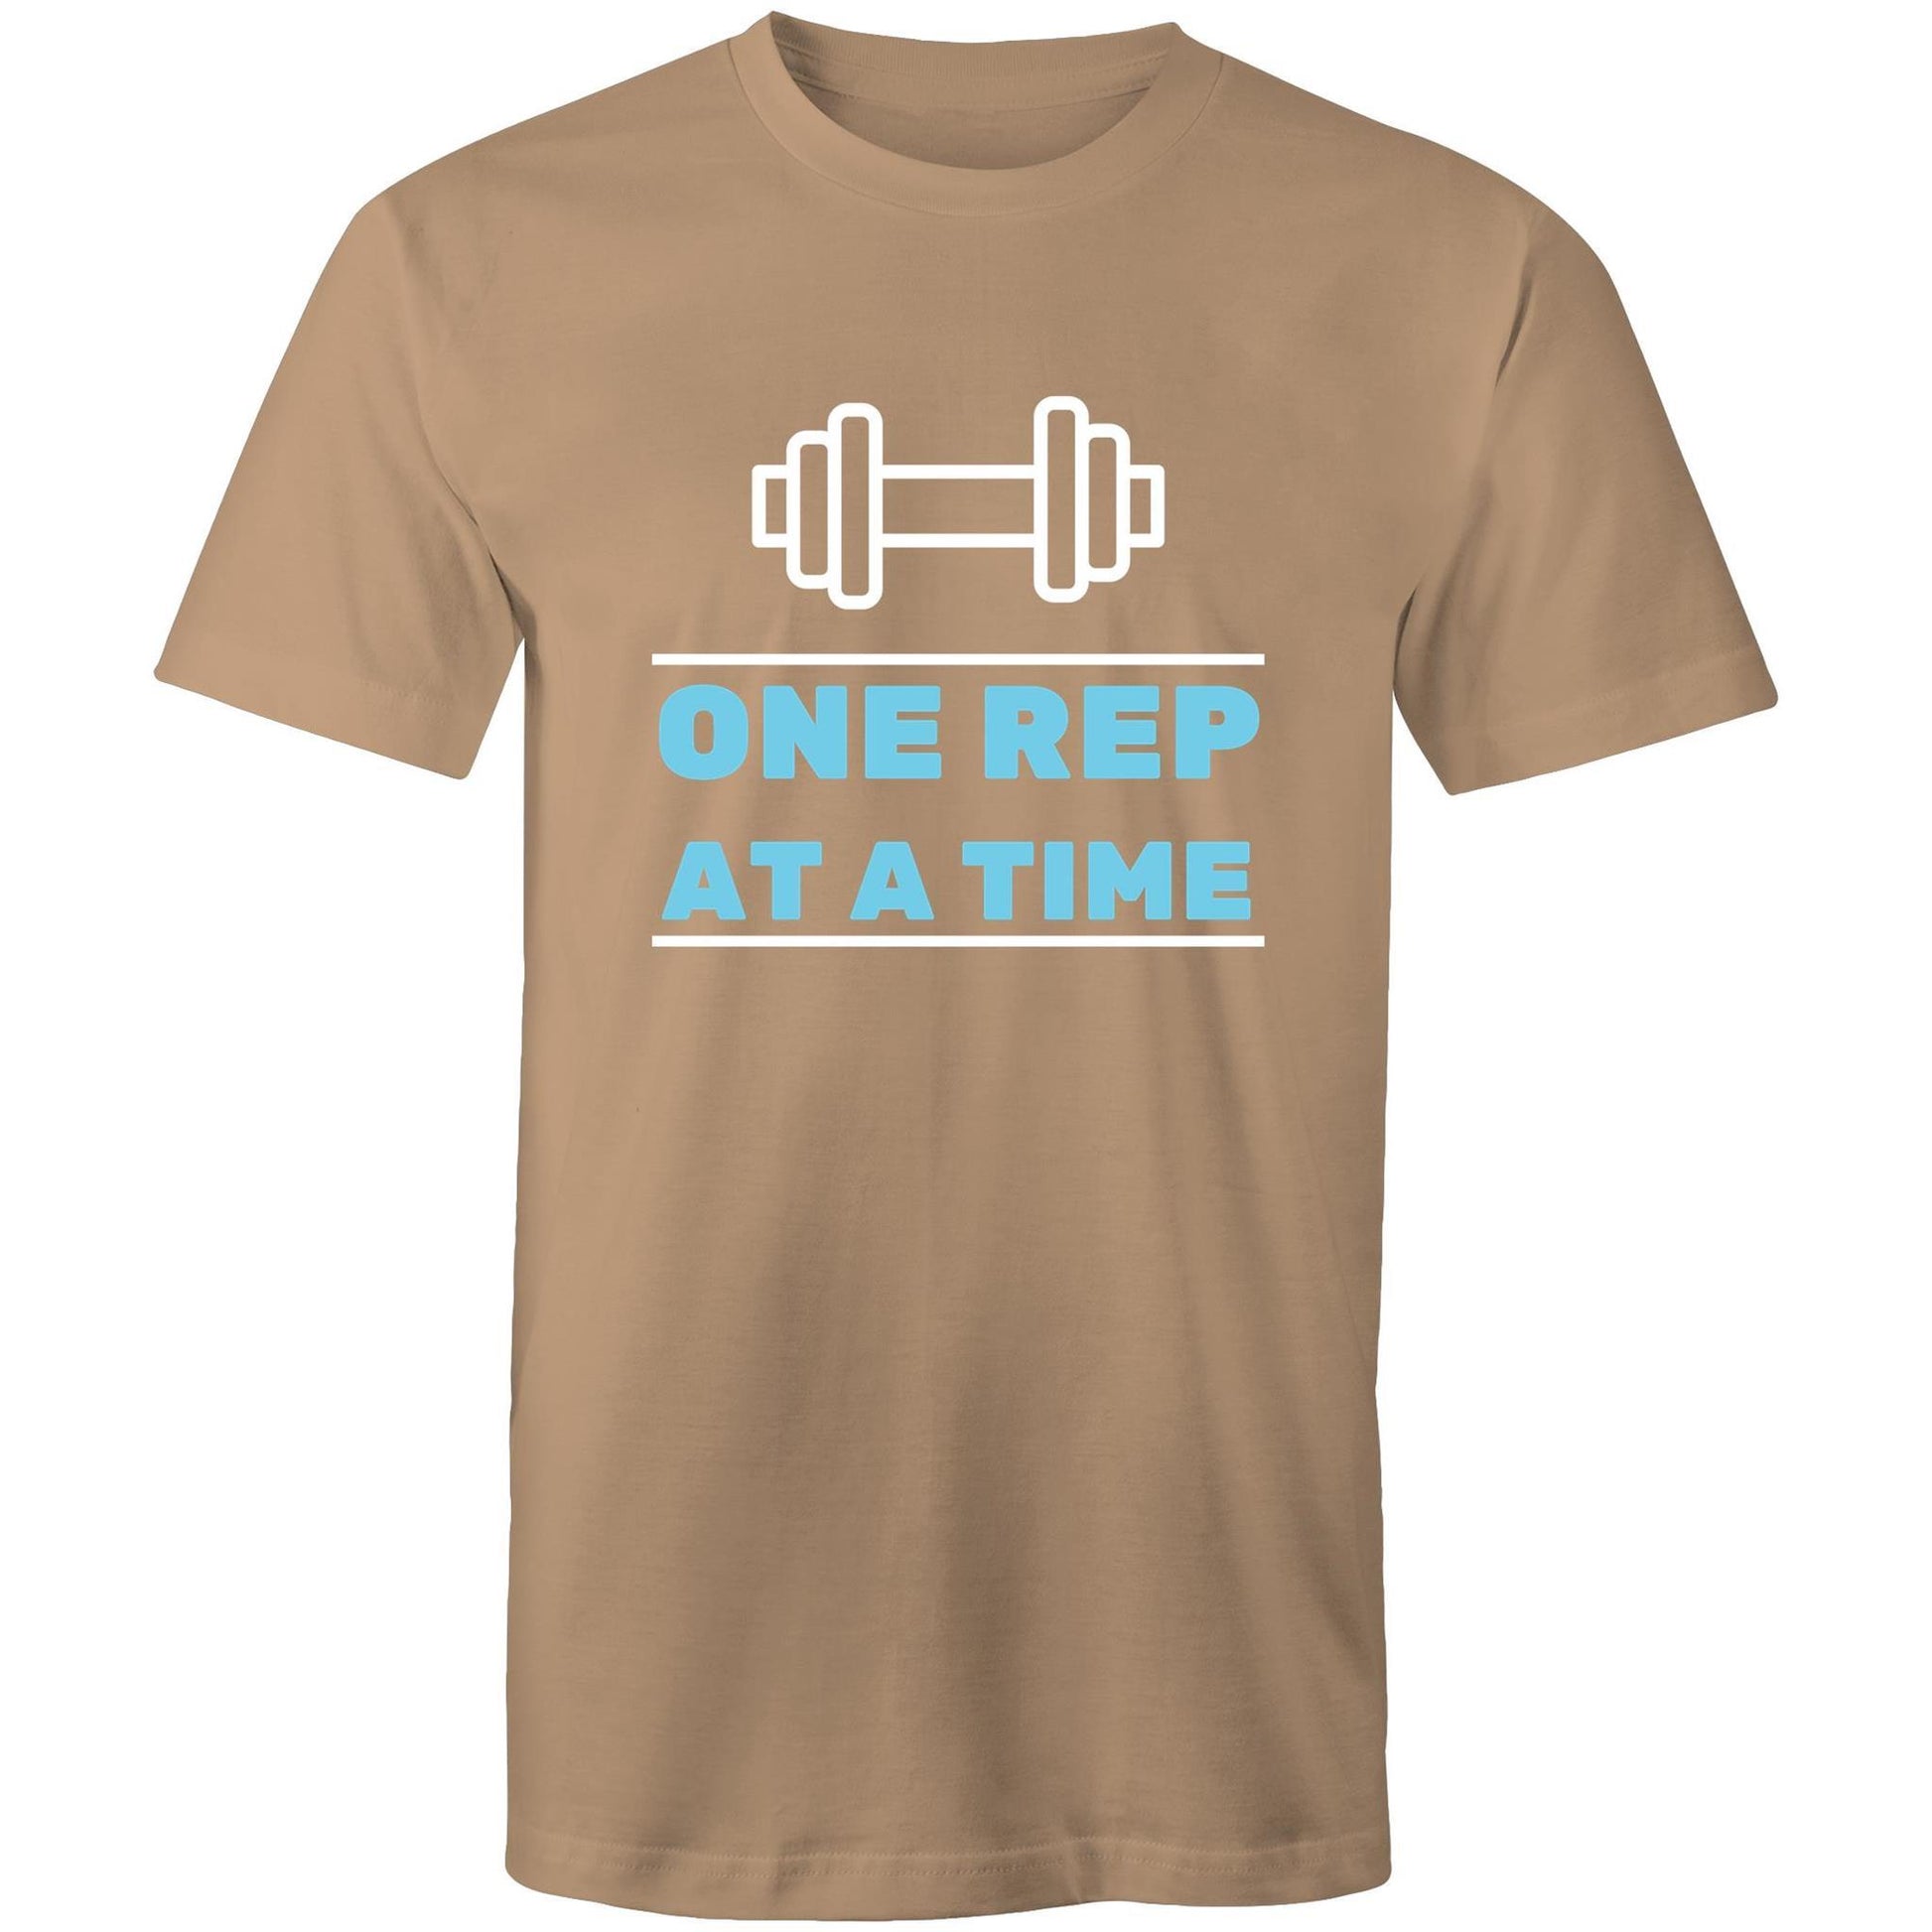 One Rep At A Time - Short Sleeve T-shirt Tan Fitness T-shirt Fitness Mens Womens